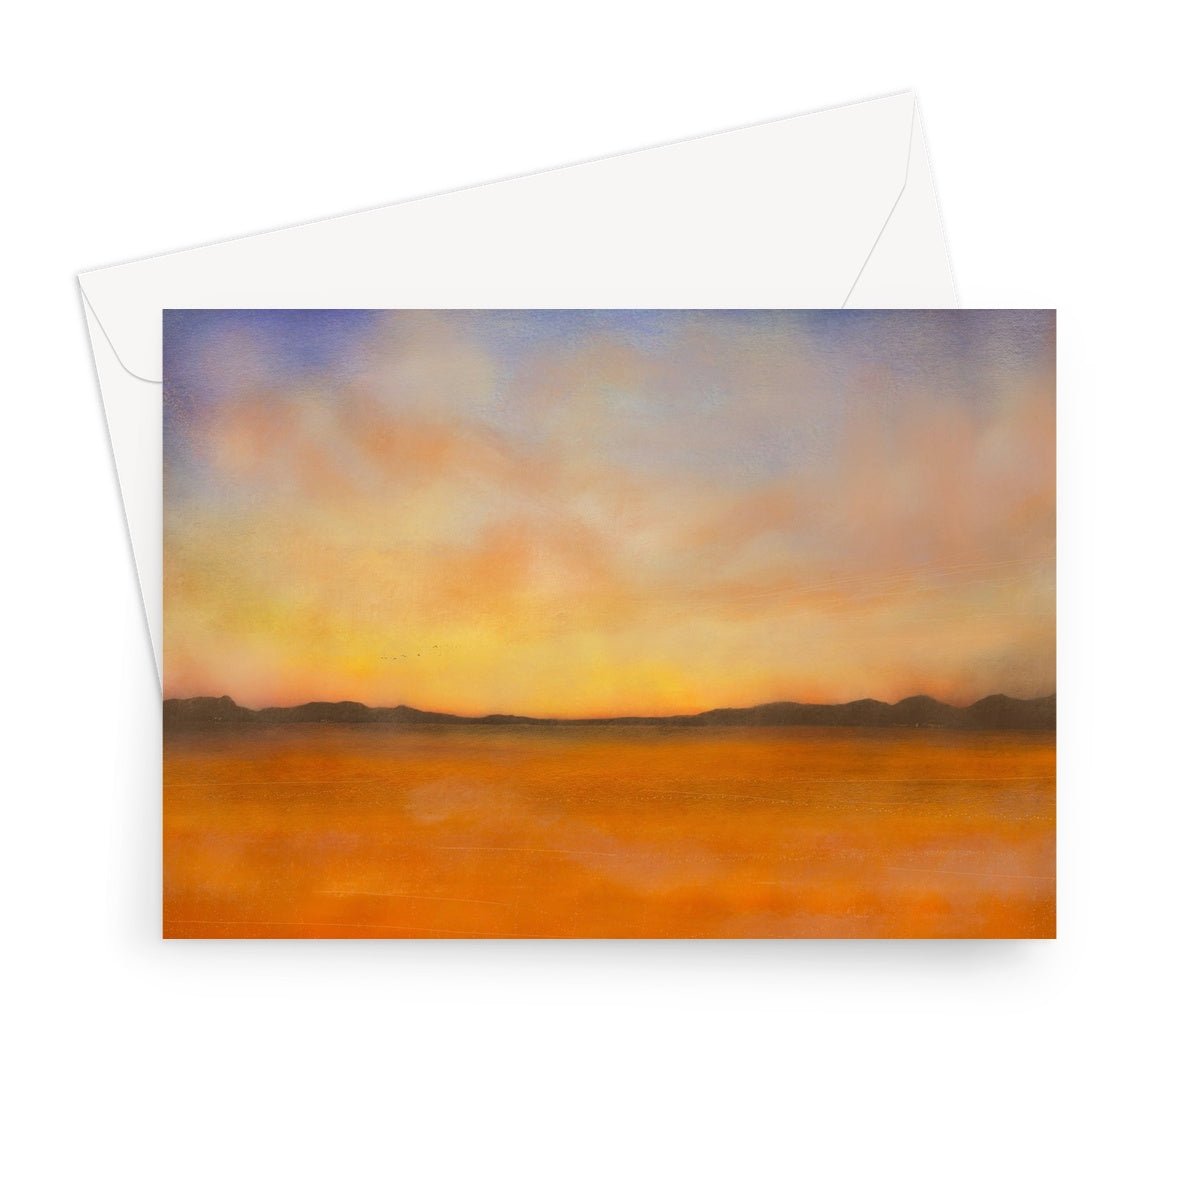 Islay Dawn Art Gifts Greeting Card-Greetings Cards-Hebridean Islands Art Gallery-7"x5"-1 Card-Paintings, Prints, Homeware, Art Gifts From Scotland By Scottish Artist Kevin Hunter